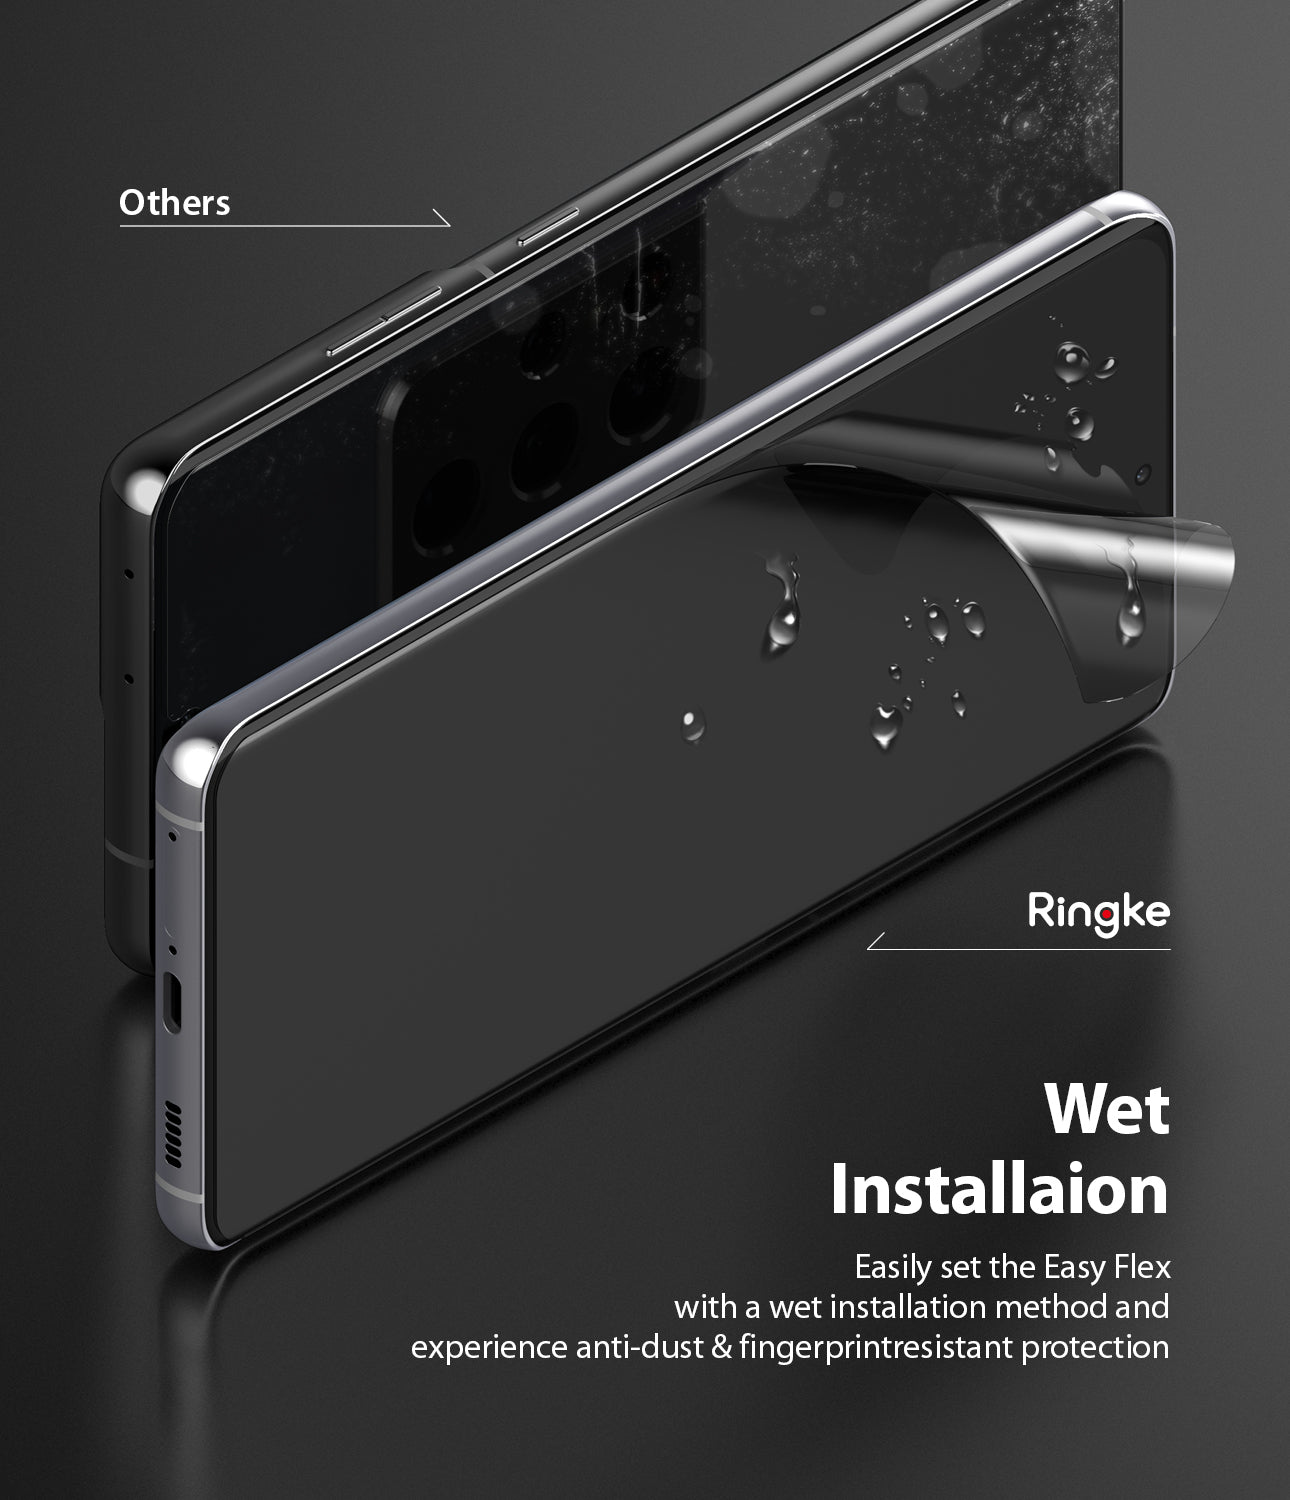 wet installation method and experience anti-dust and fingerprint resistant protection